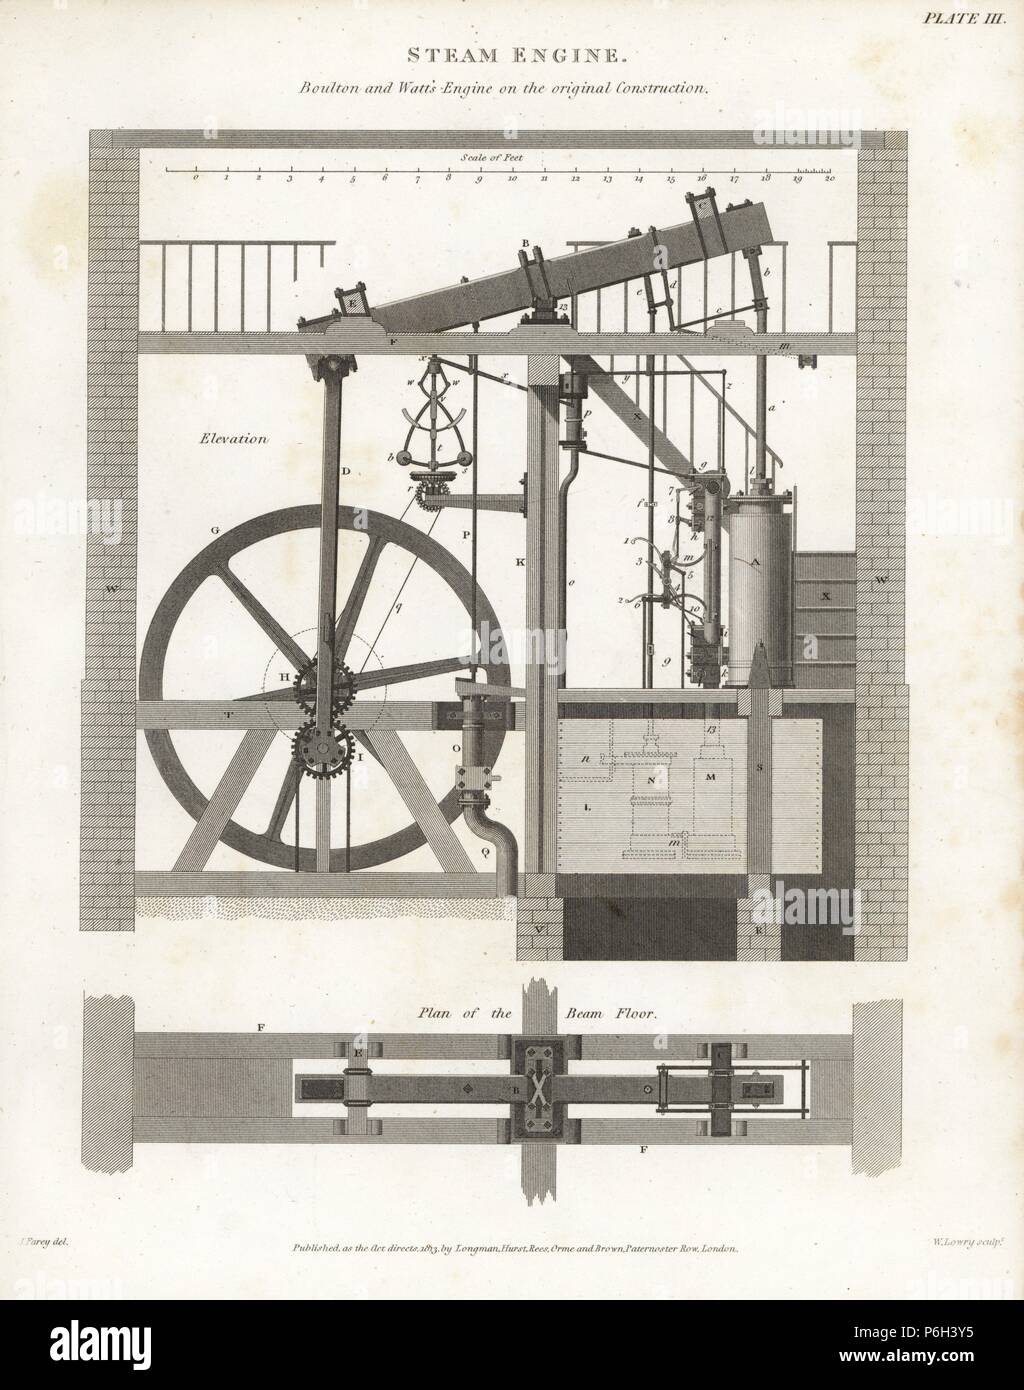 Matthew Boulton and James Watt's steam engine, elevation and plan of the beam floor, 1776. Copperplate engraving by Wilson Lowry after an Illustration by J. Farey from Abraham Rees' 'Cyclopedia or Universal Dictionary,' London, 1813. Stock Photo